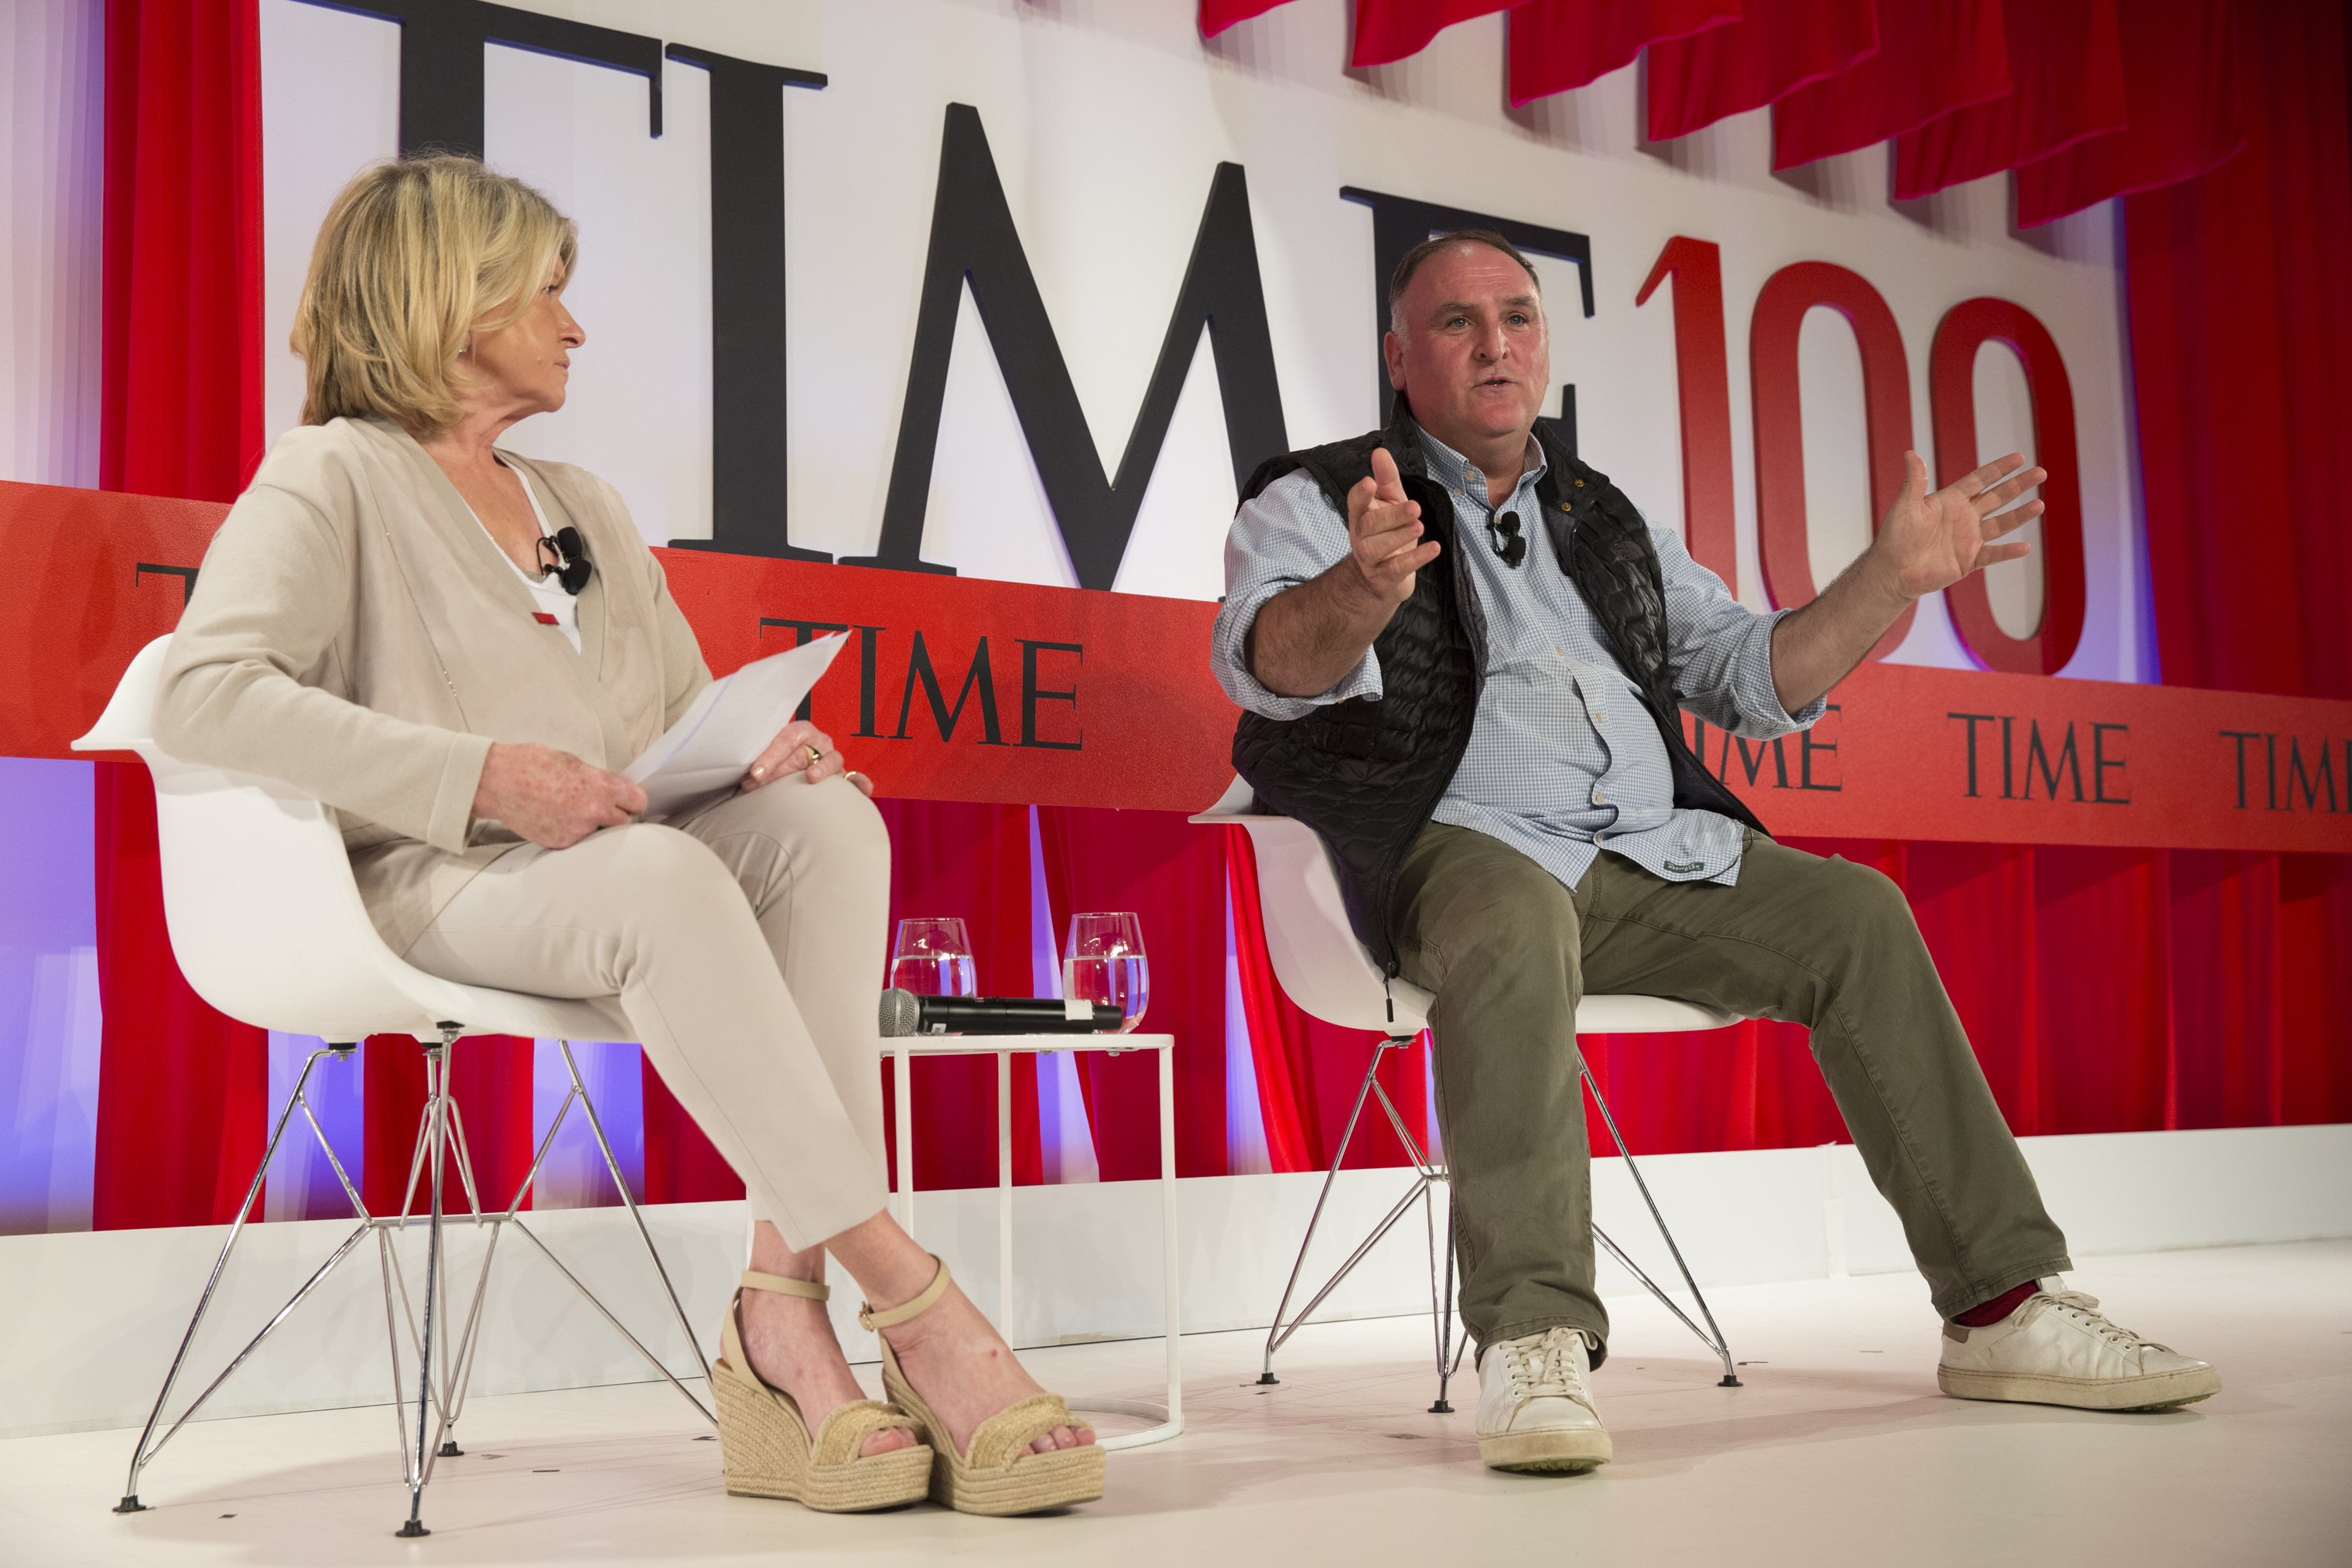 Martha Stewart, founder of Martha Stewart Living Omnimedia, speaks with Chef José Andrés at the TIME 100 Summit in New York, on April 23, 2019.